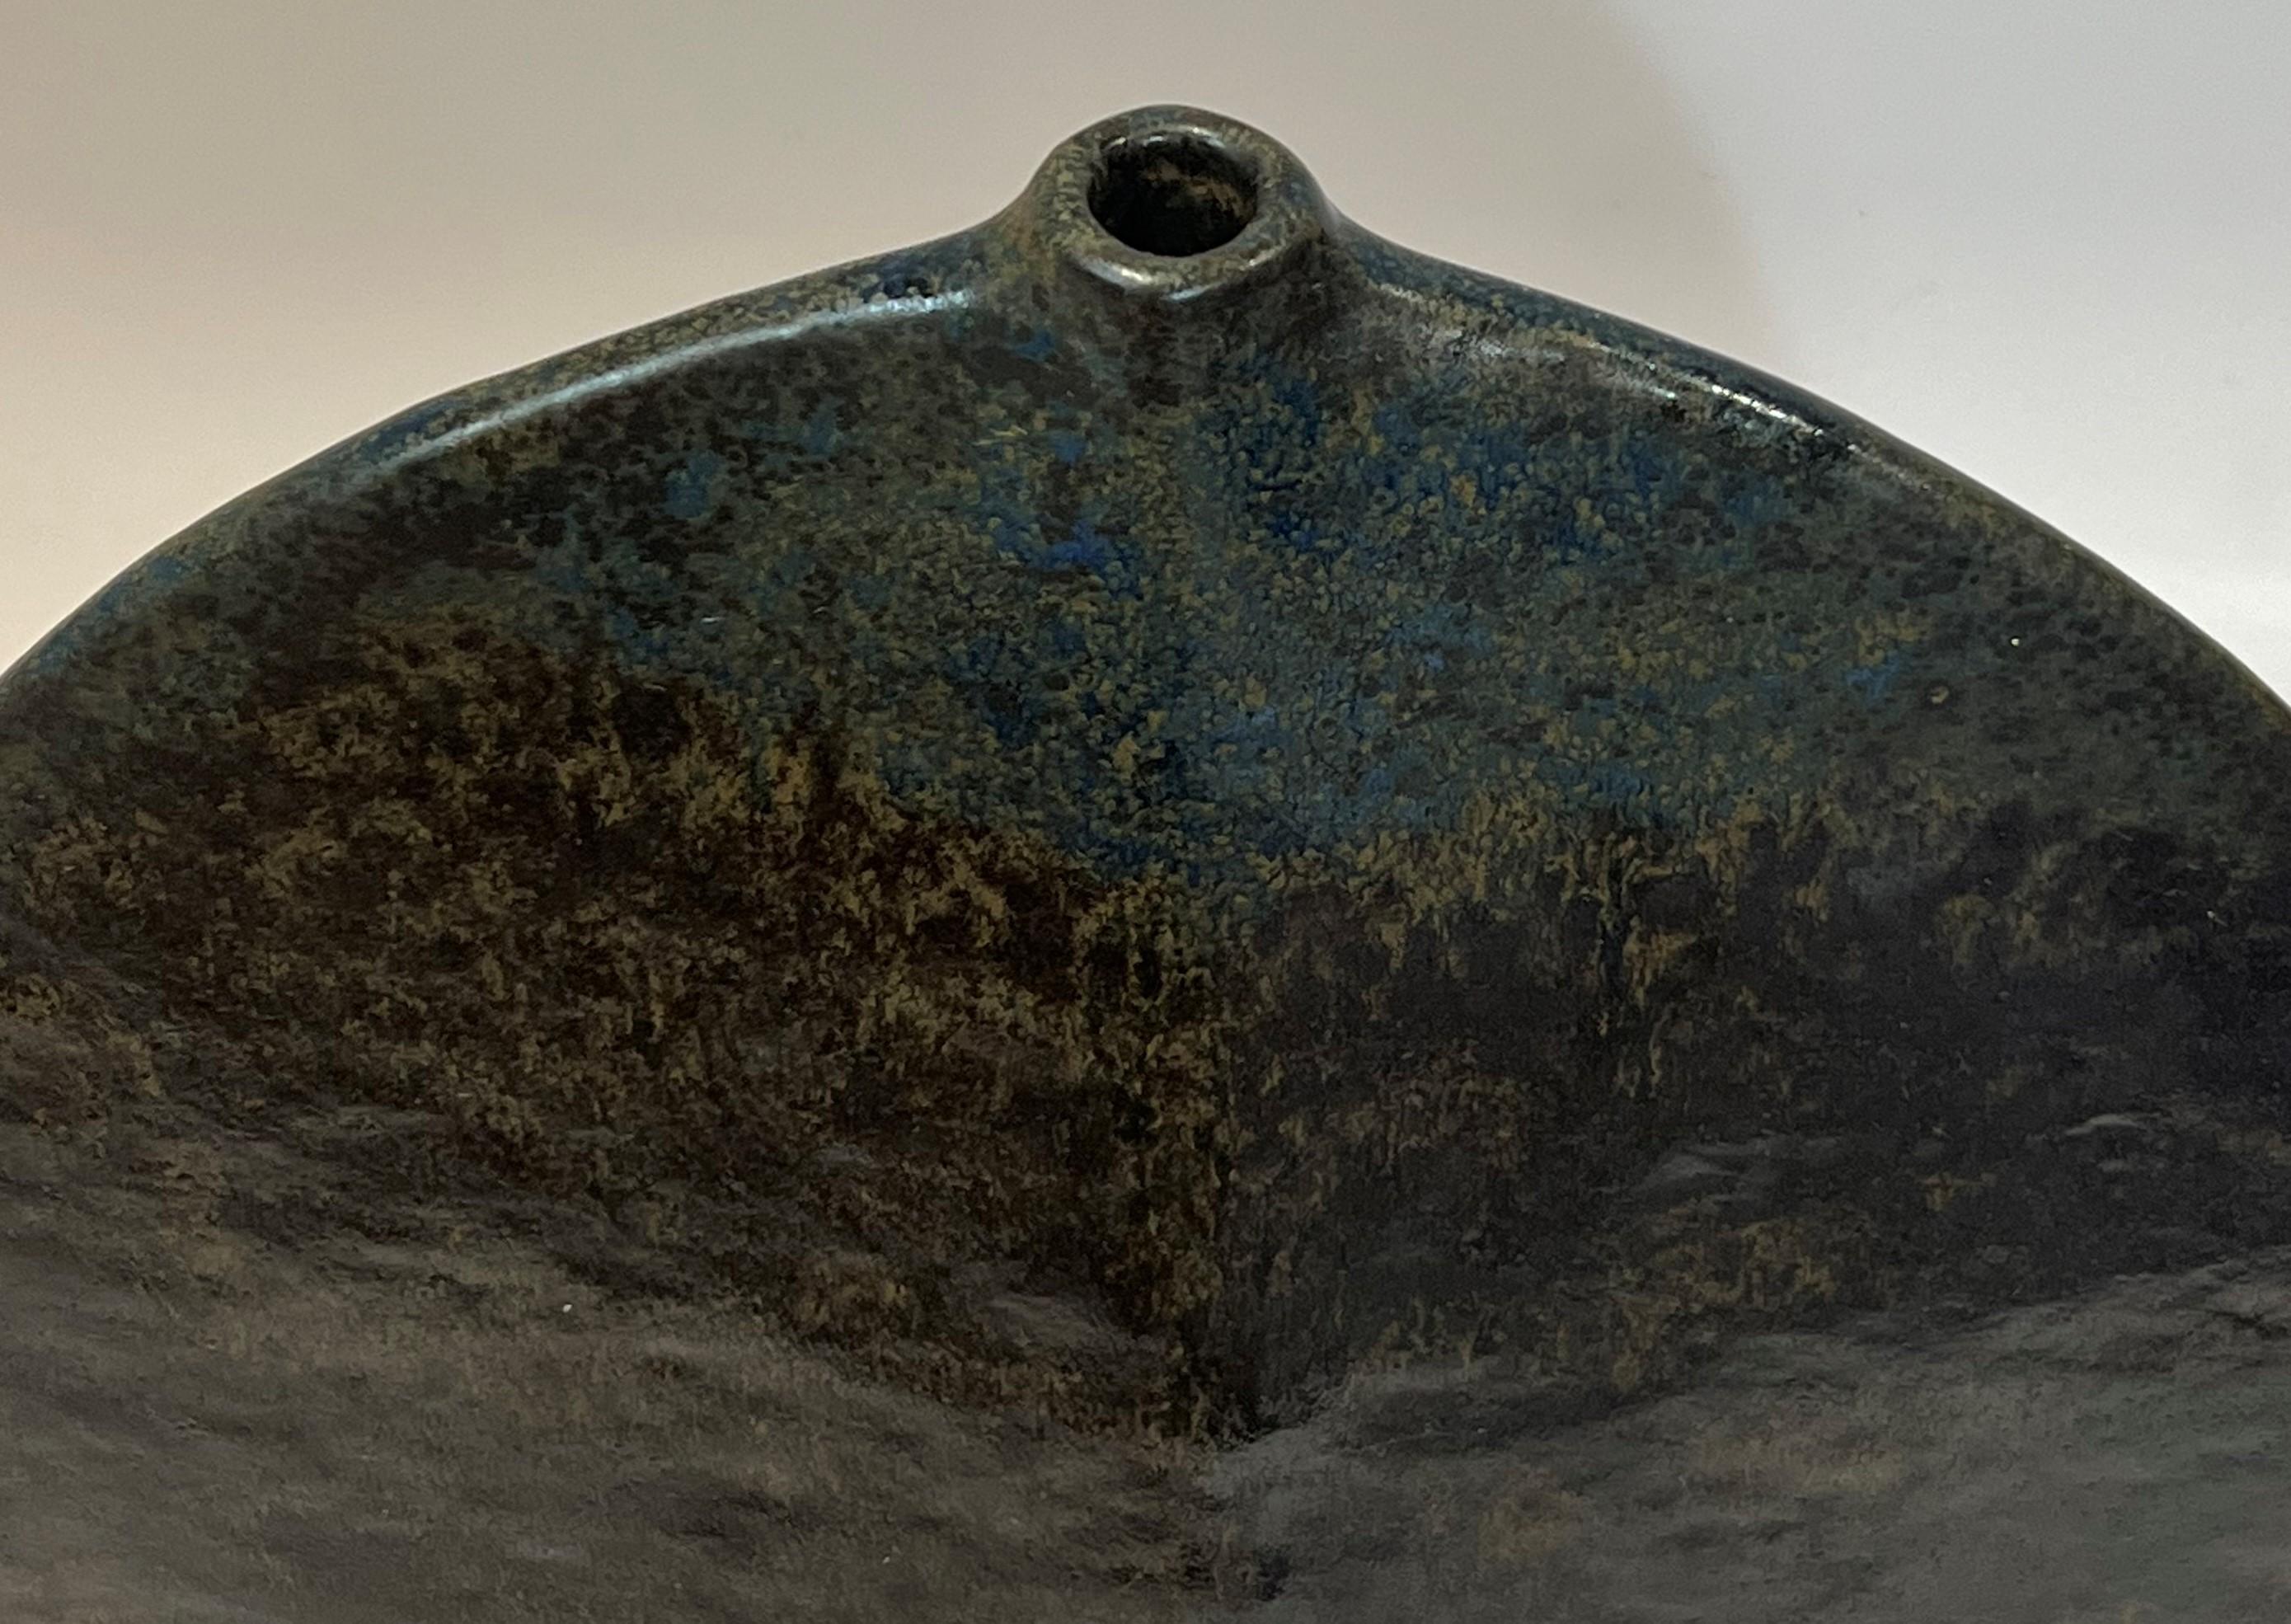 Gerald Weigel is a German ceramicist and founding member of group 83. His work with sophisticated glazes on simple nature inspired forms is collected across the globe. This large example features a rich overlay of glaze that appears to be alkaline